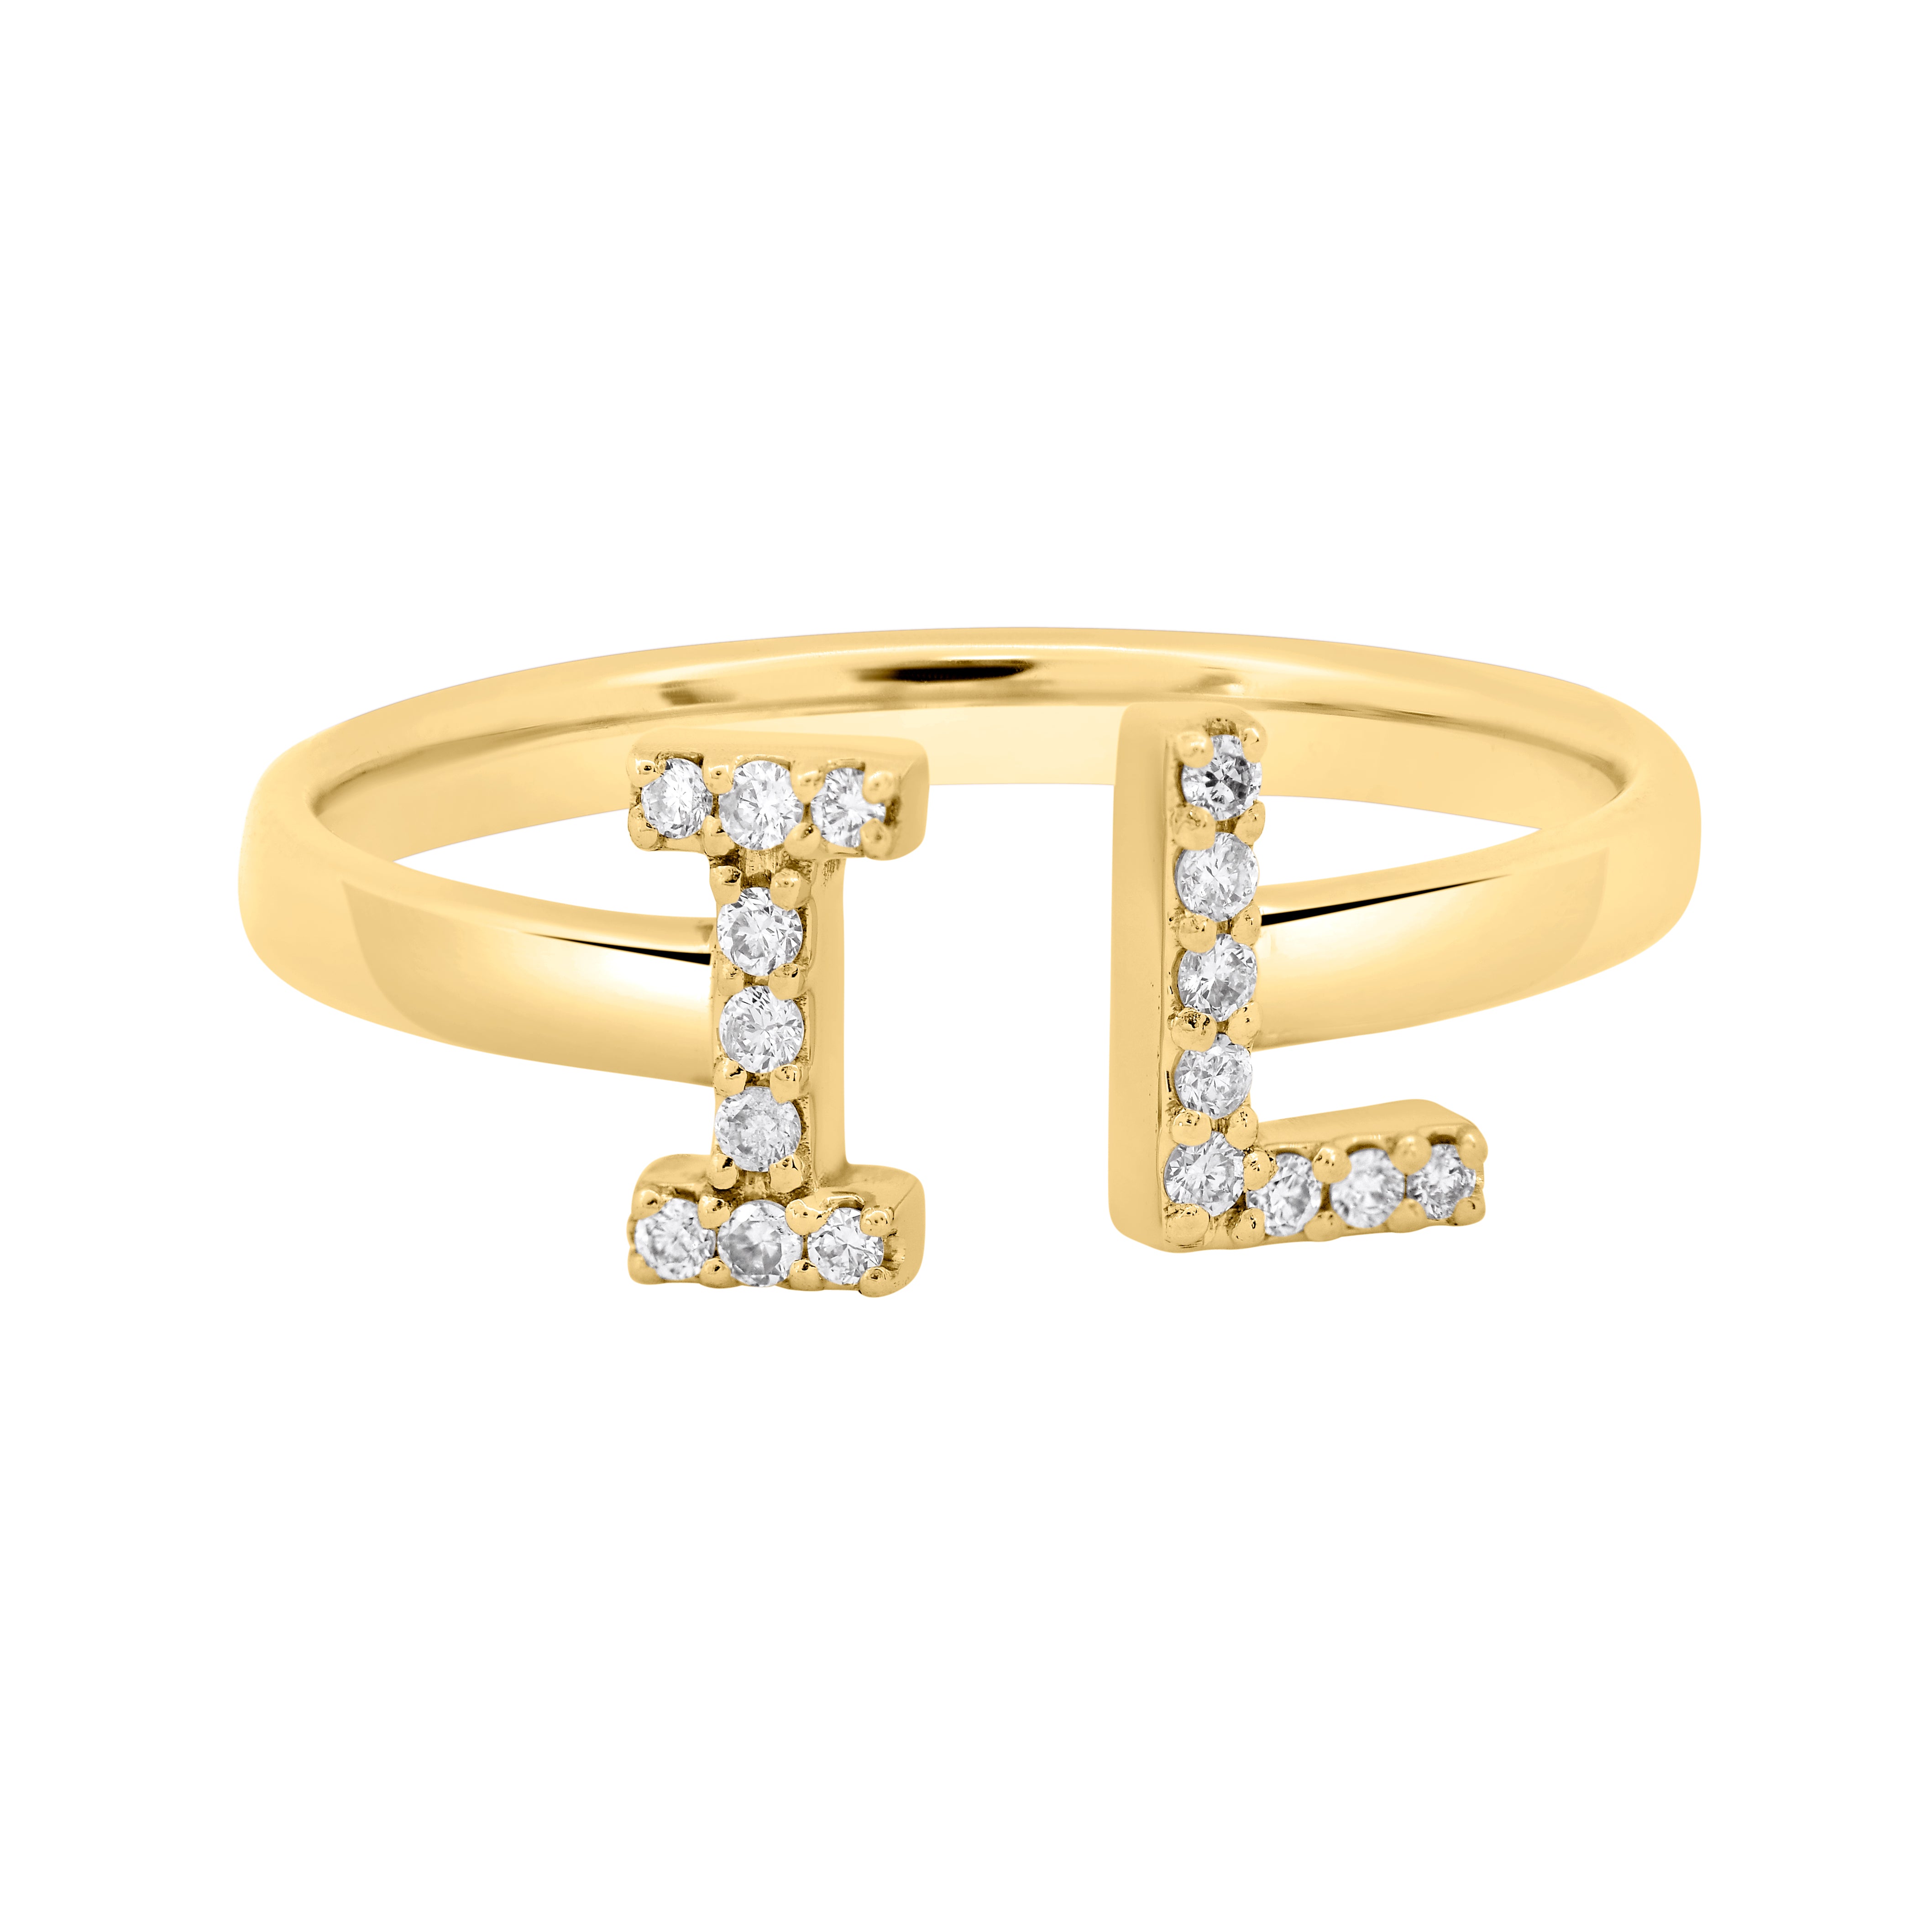 Two Initial Diamond Ring